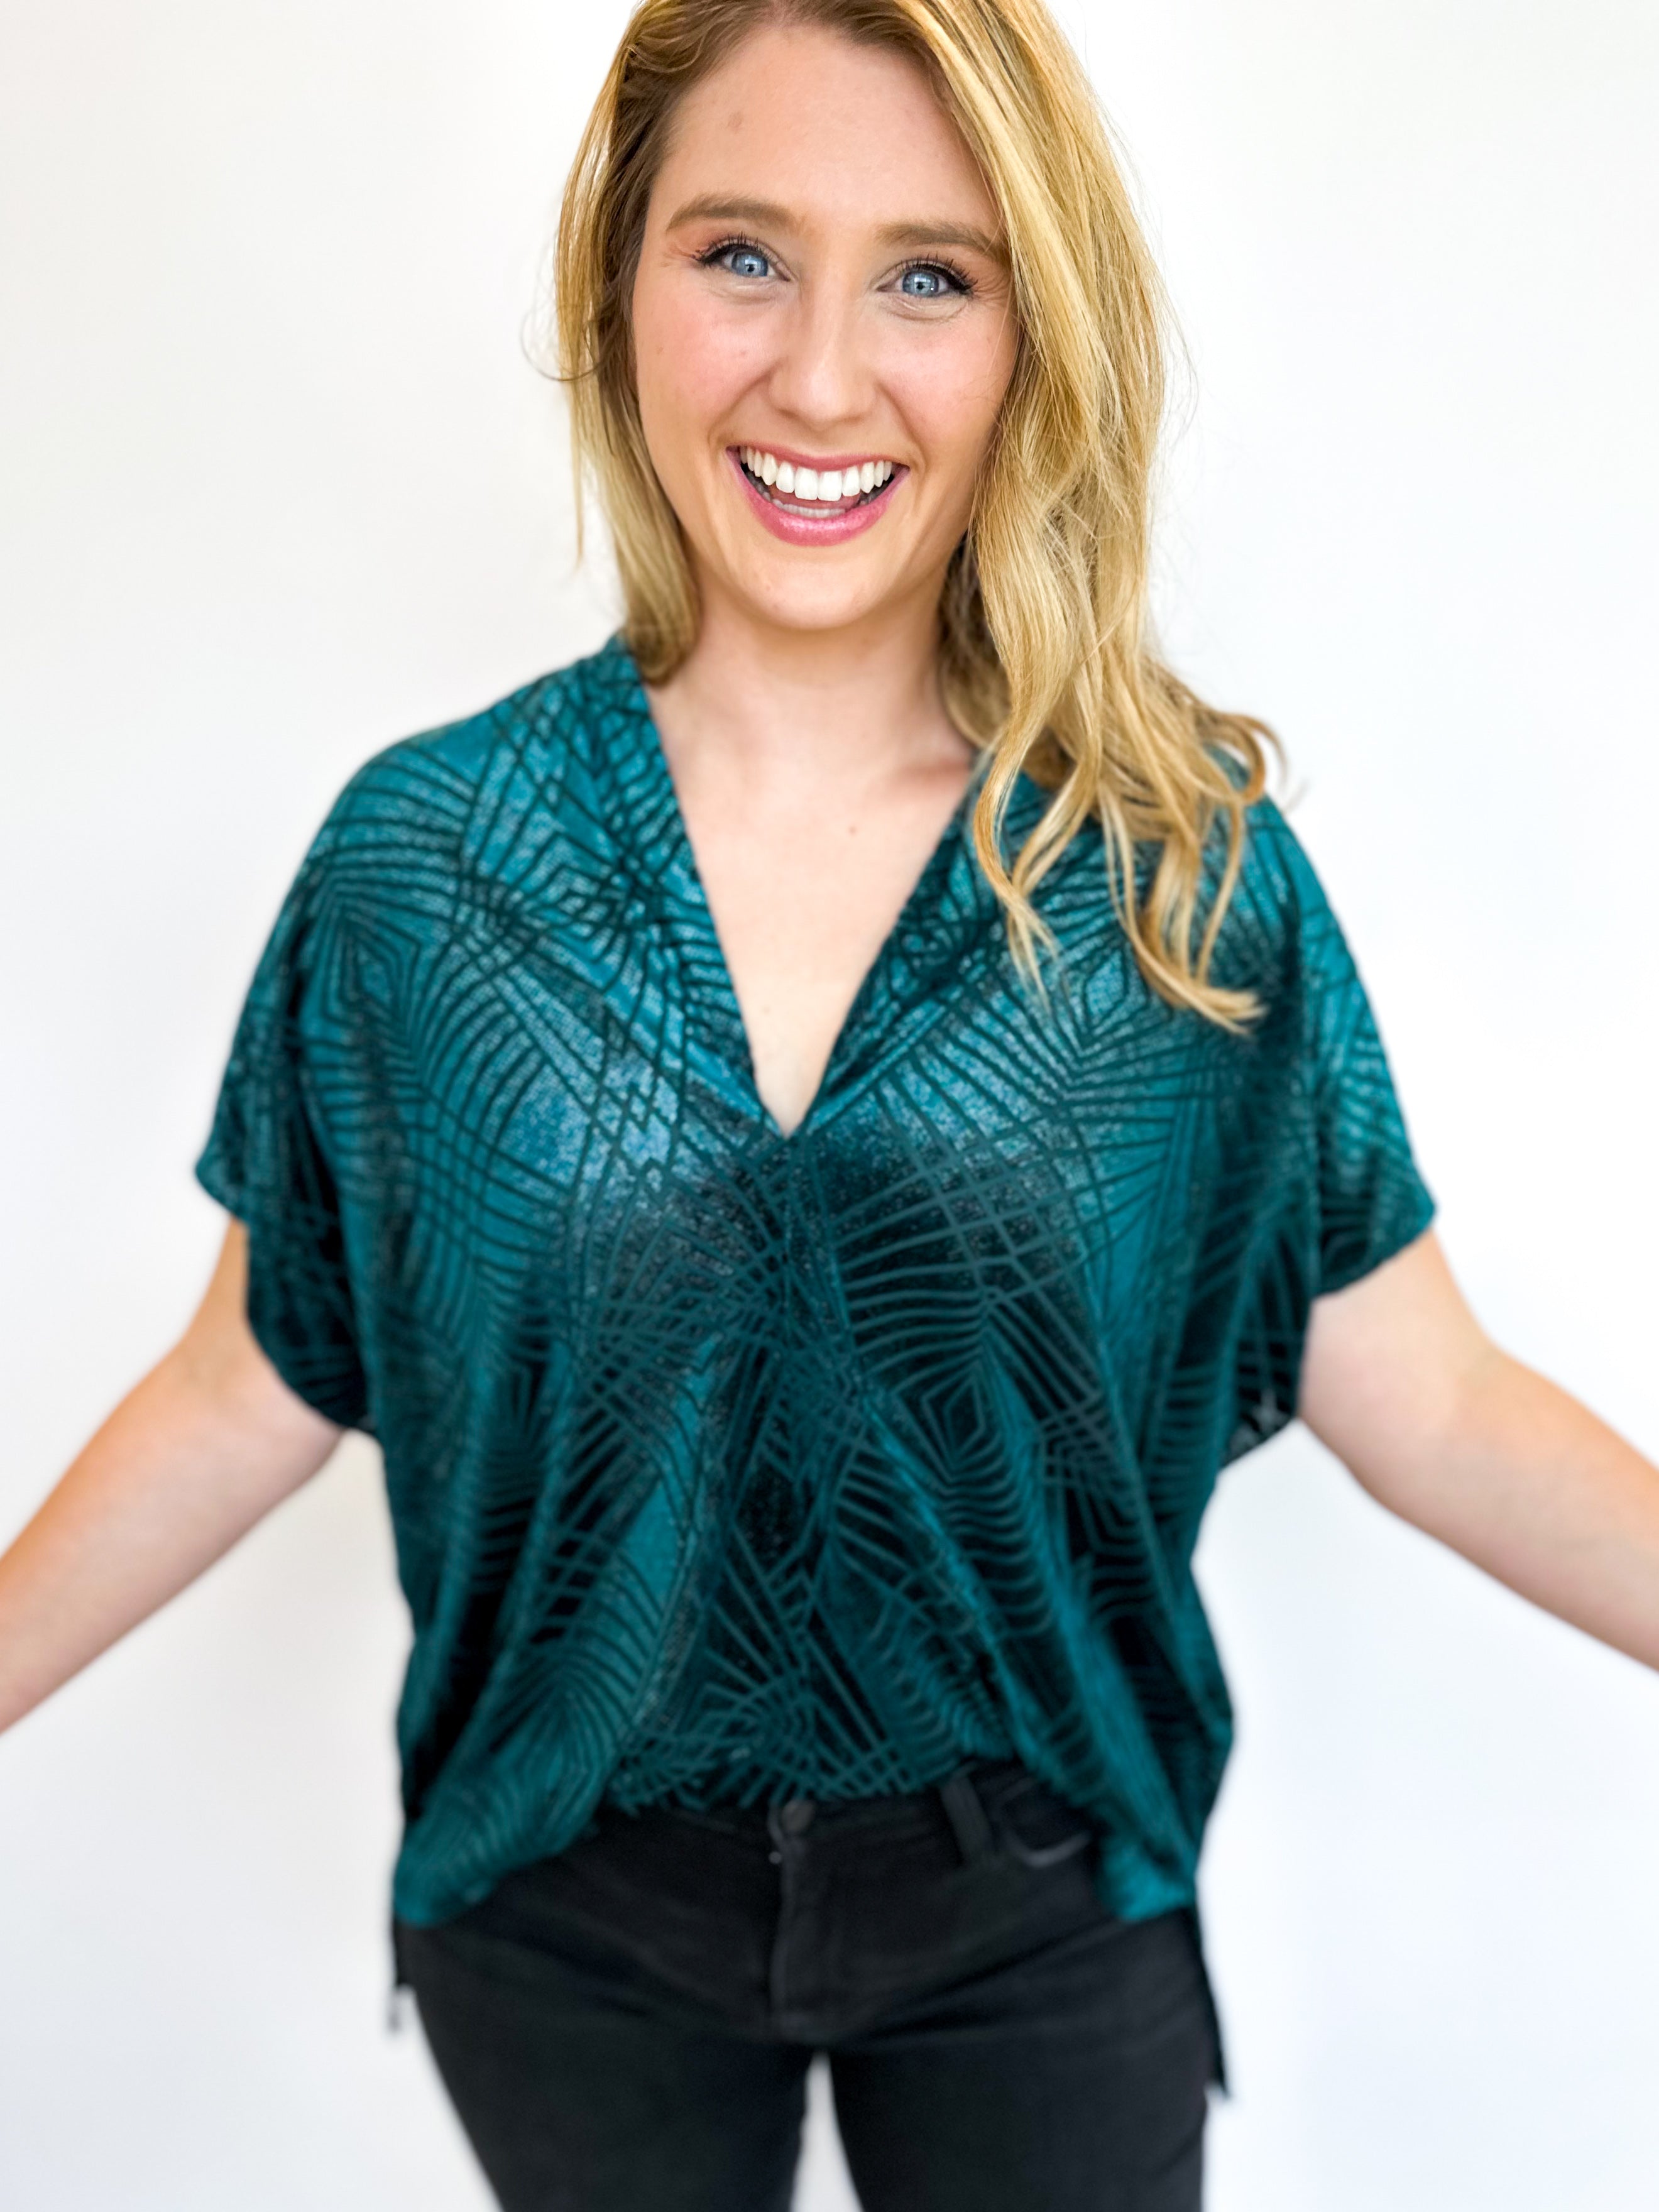 Winter Teal Velvet Blouse-200 Fashion Blouses-ADRIENNE-July & June Women's Fashion Boutique Located in San Antonio, Texas